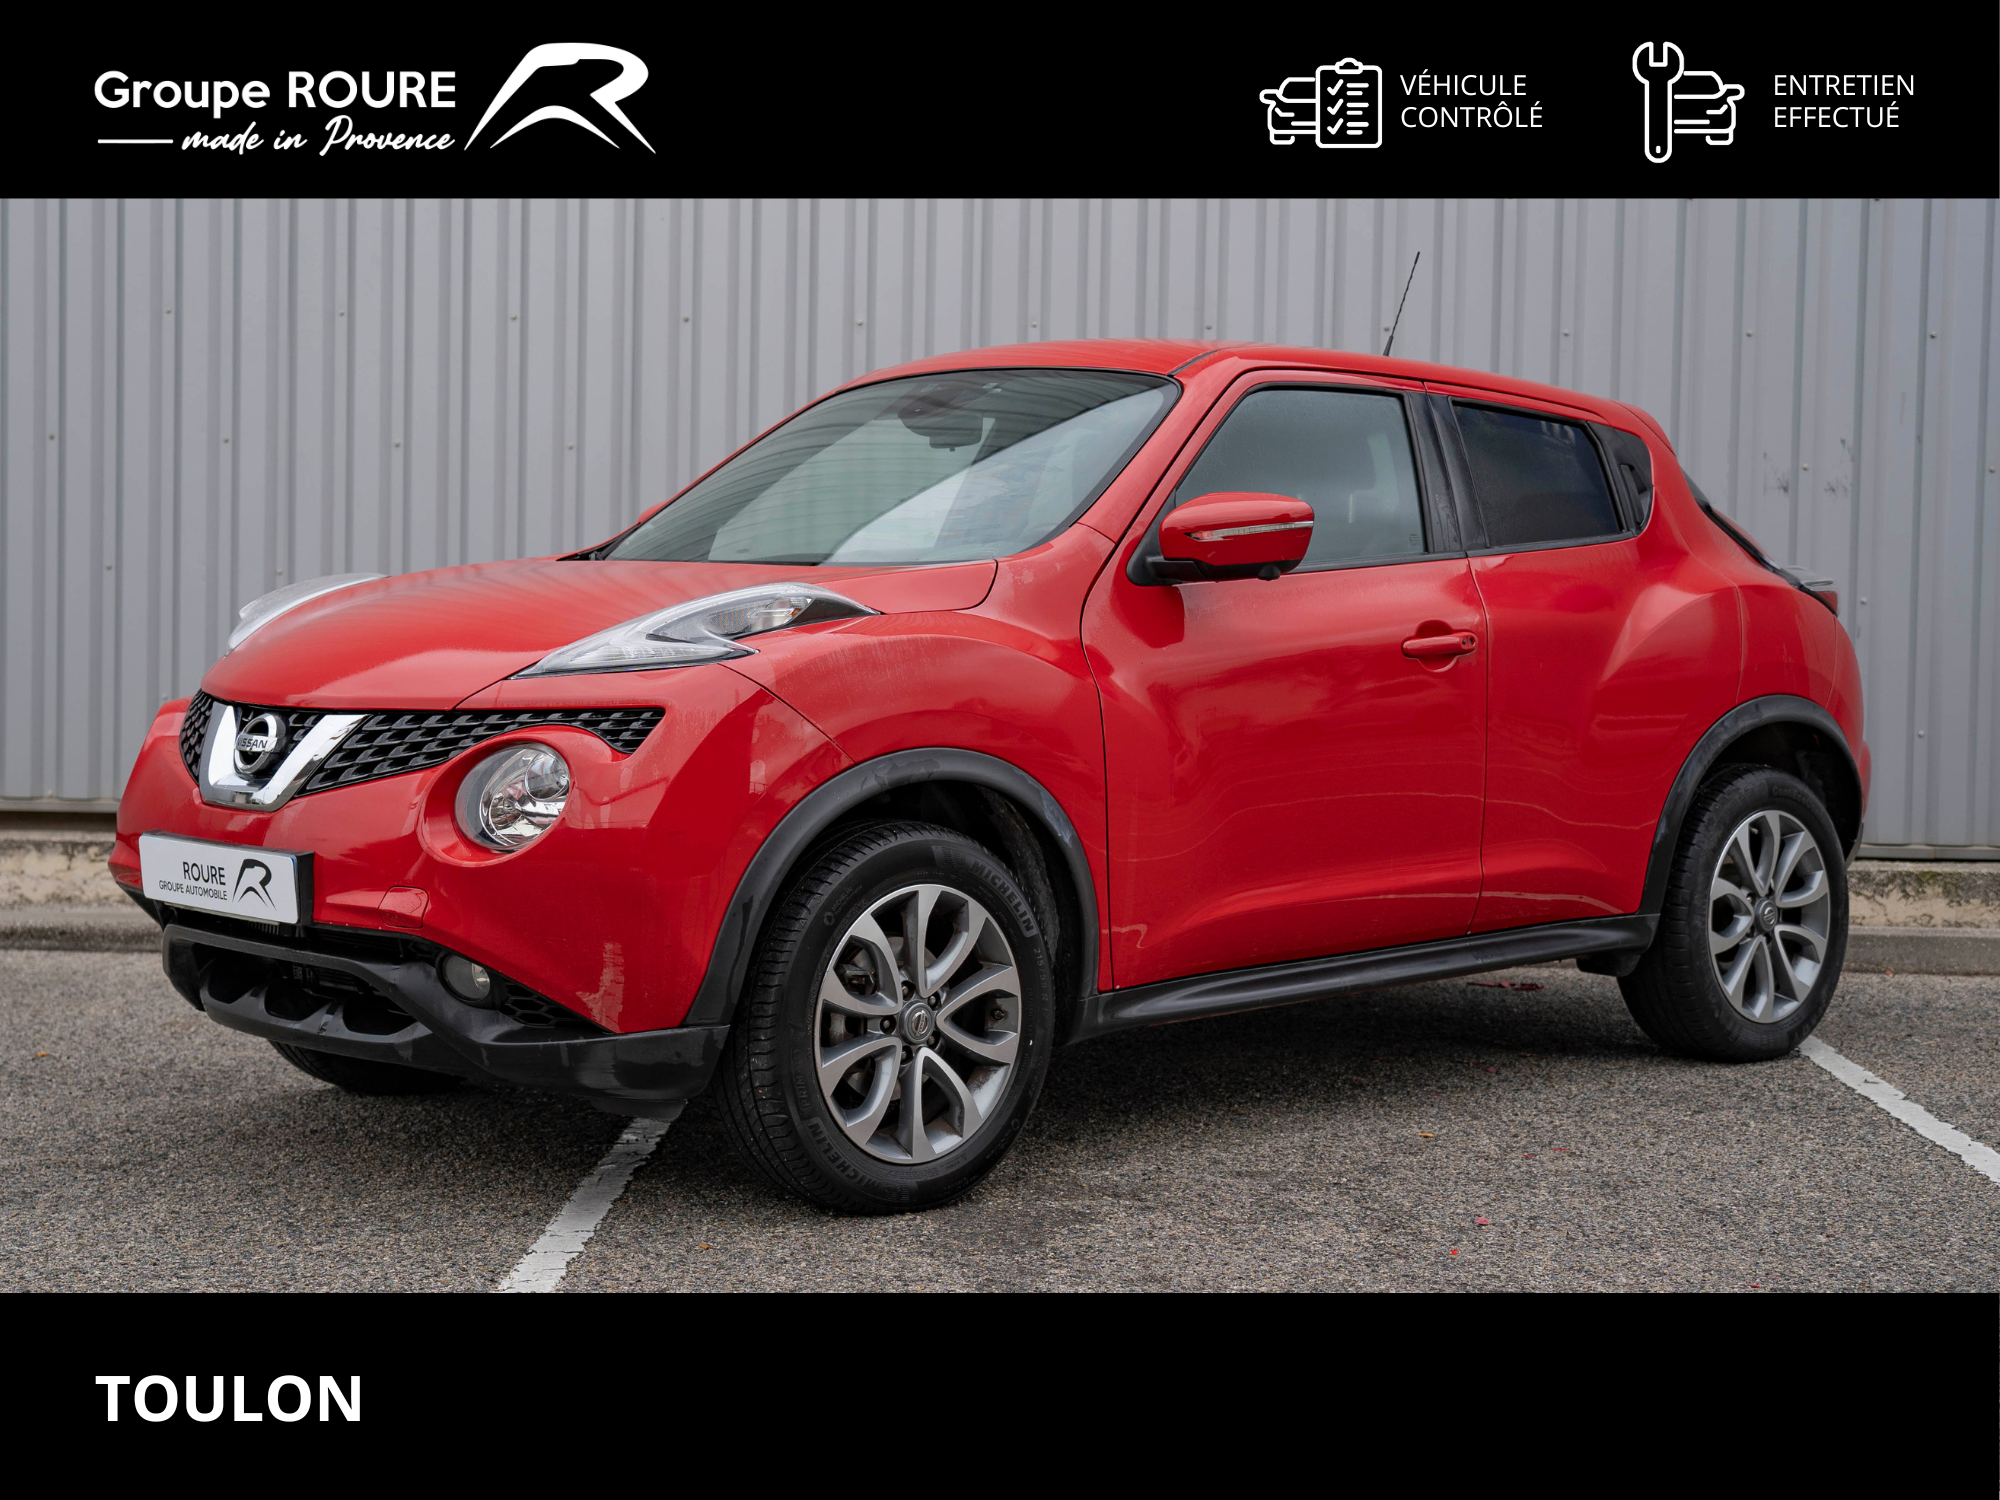 NISSAN-JUKE-Juke 1.2e DIG-T 115 Start/Stop System-Connect Edition-8990-97286-roure-automobiles